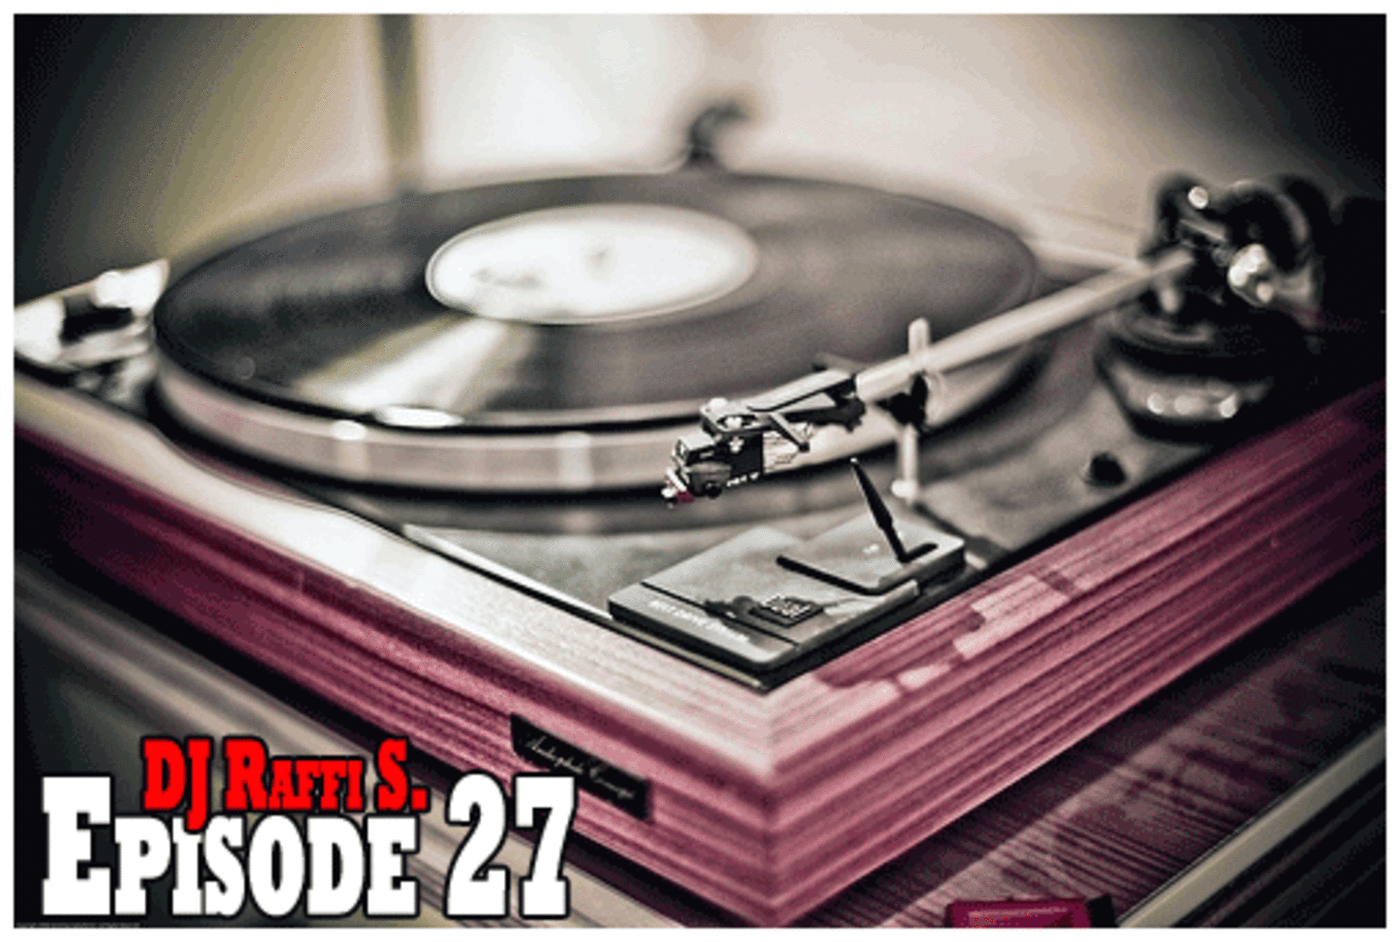 The DJ Raffi S. Weekly Podcast Show - Episode 27